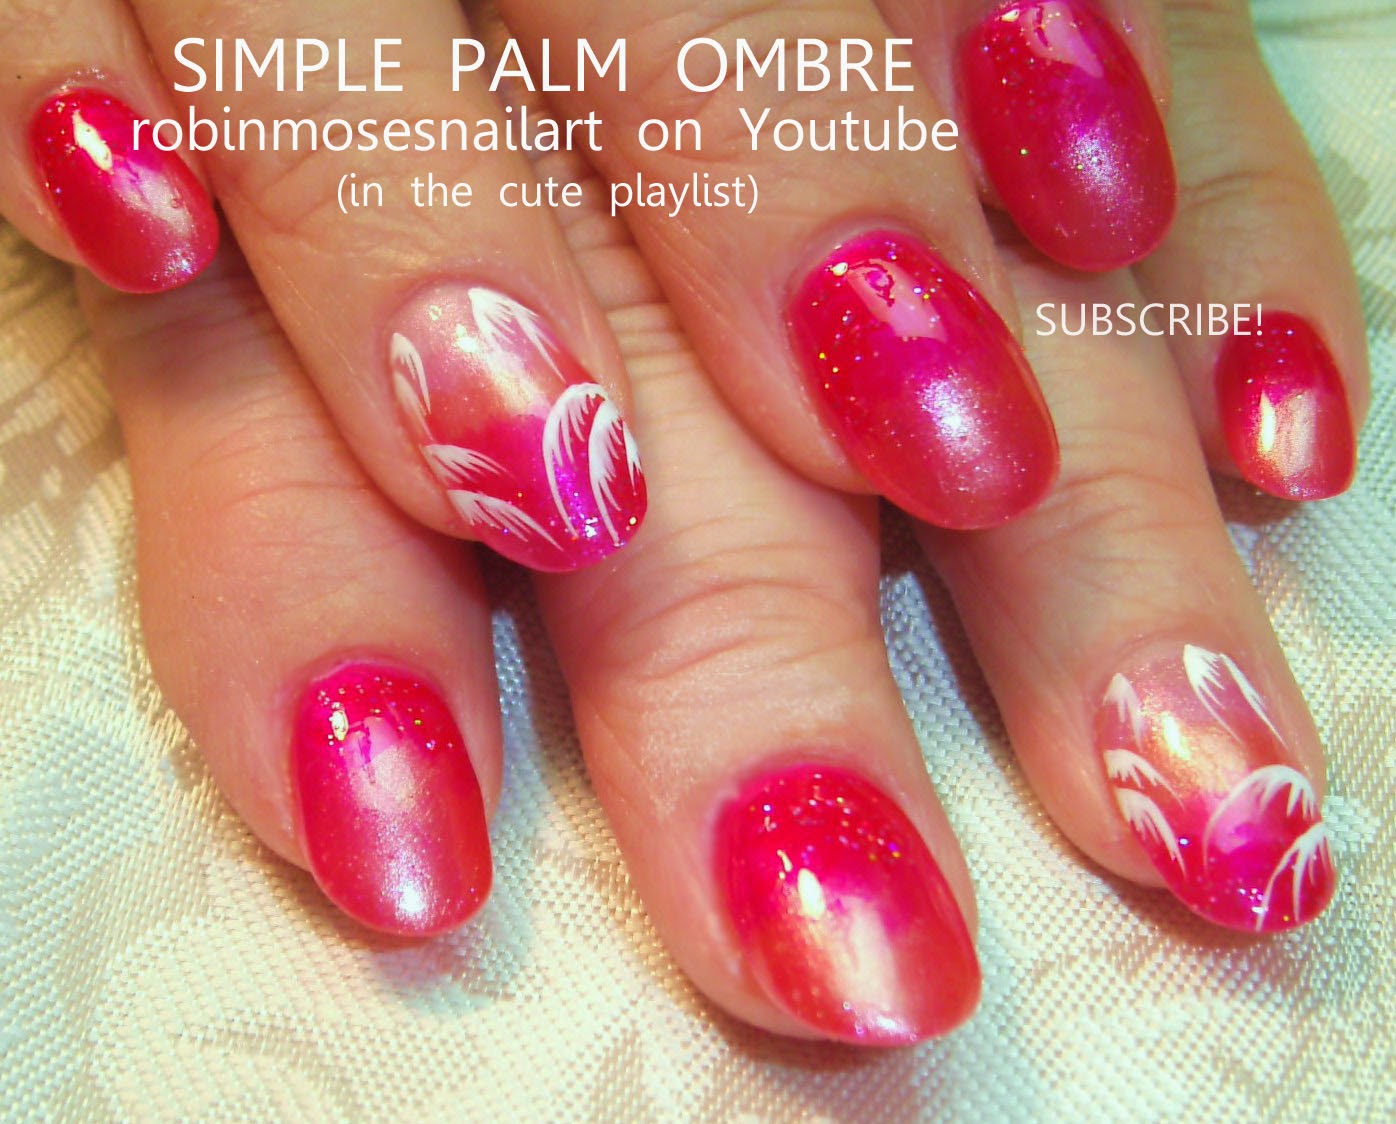 2. Colorful tropical nail art with bling - wide 7